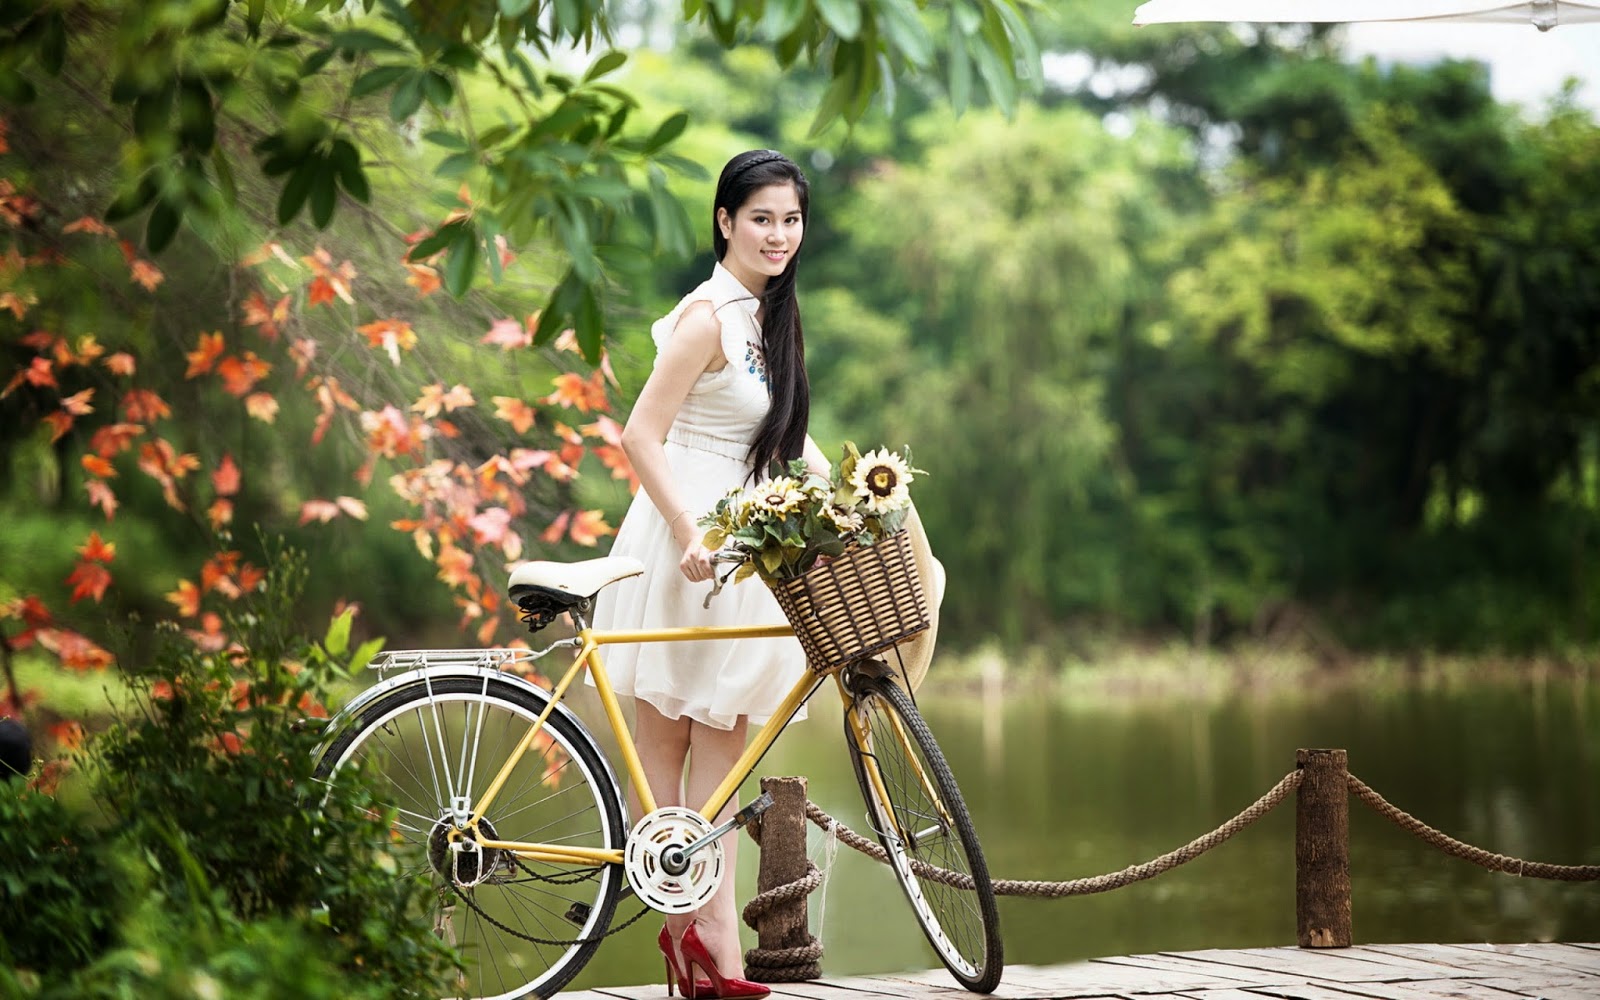 nice and cute wallpaper,bicycle,bicycle part,photograph,nature,bicycle accessory